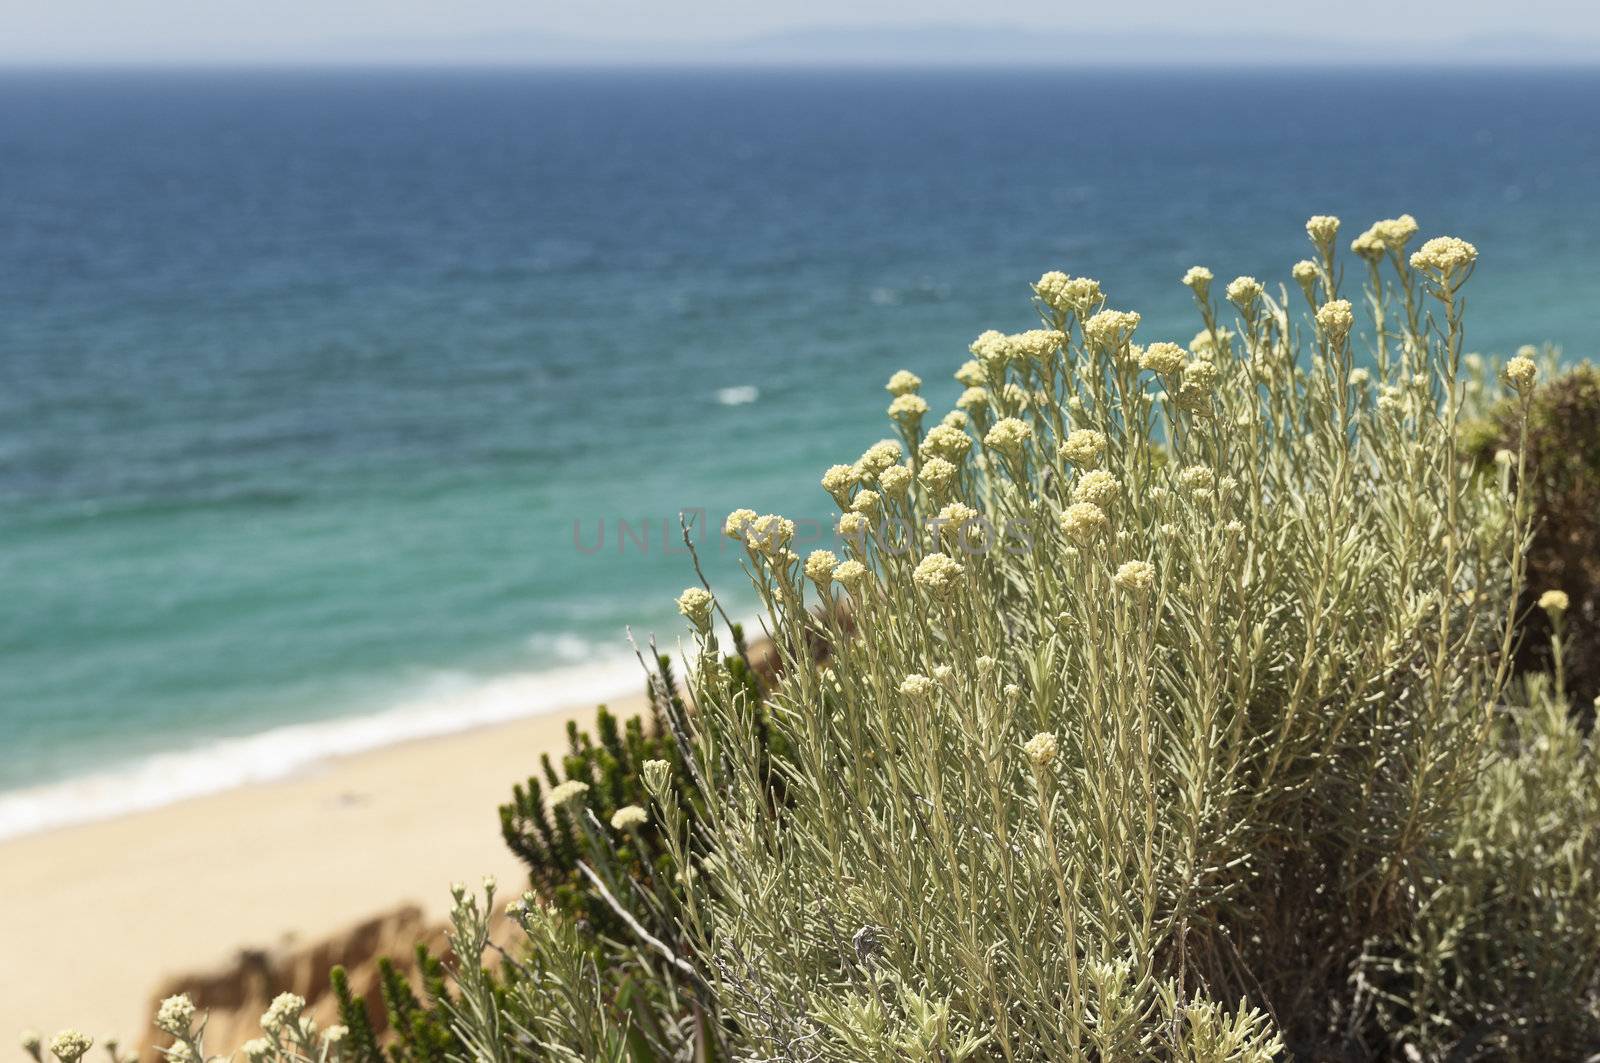 Curry plant -  Helichrysum italicum subsp. picardii - in the sandstone cliffs of Gale beach, south of Portugal